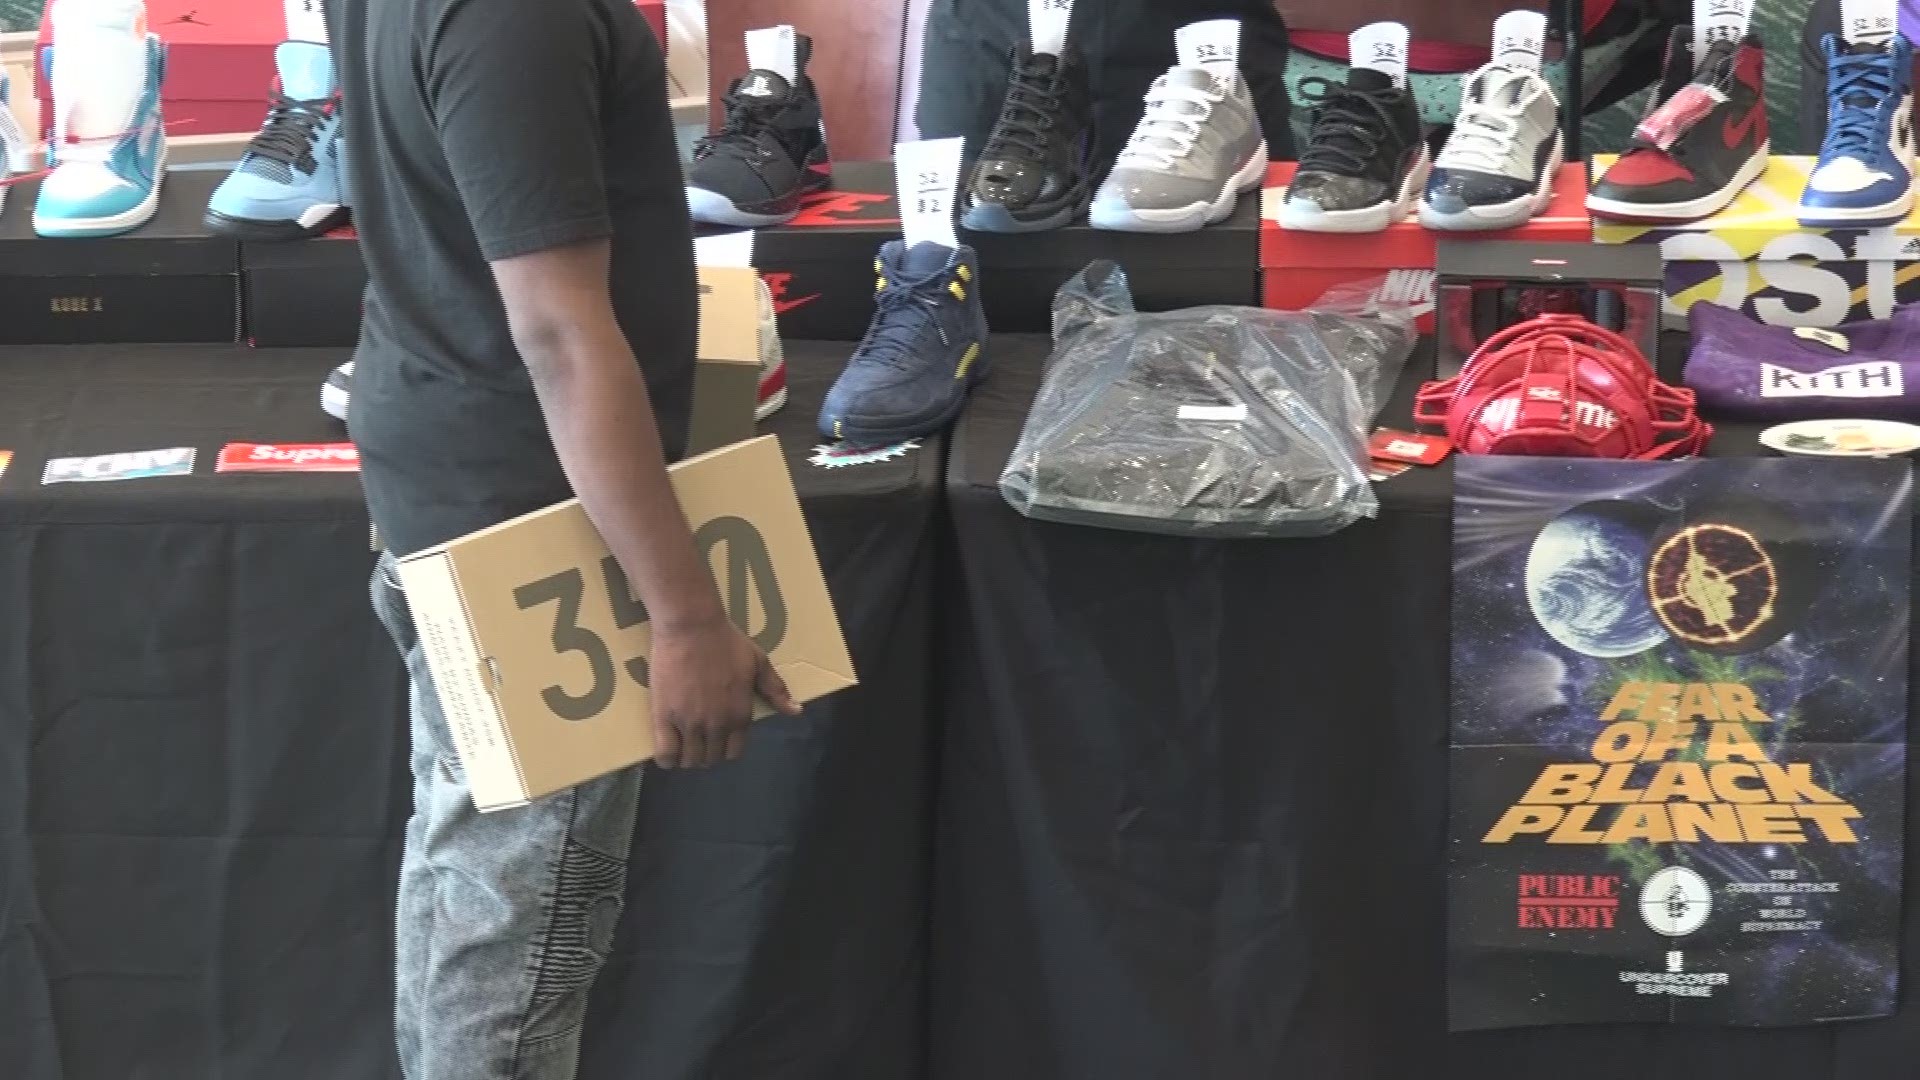 1st annual Kicktopia shoe convention held to raise money for LCADA